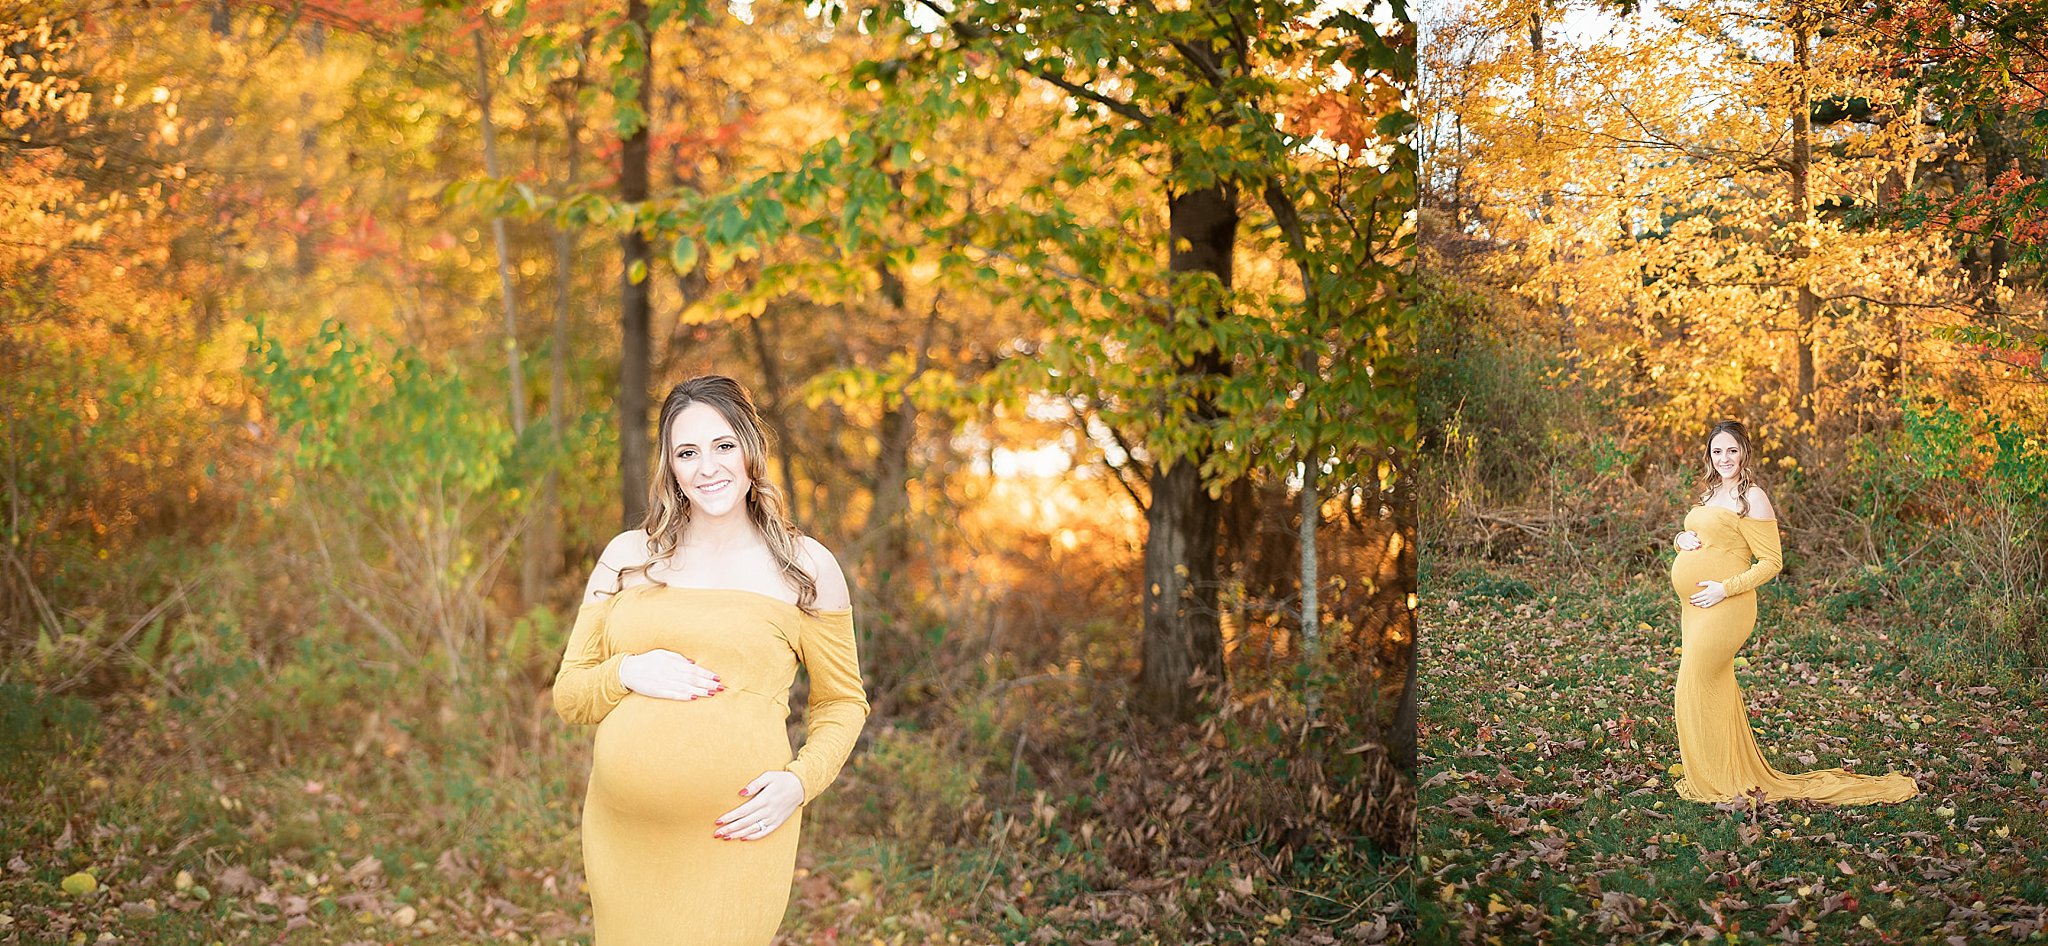 milestone photography maternity session designer gowns